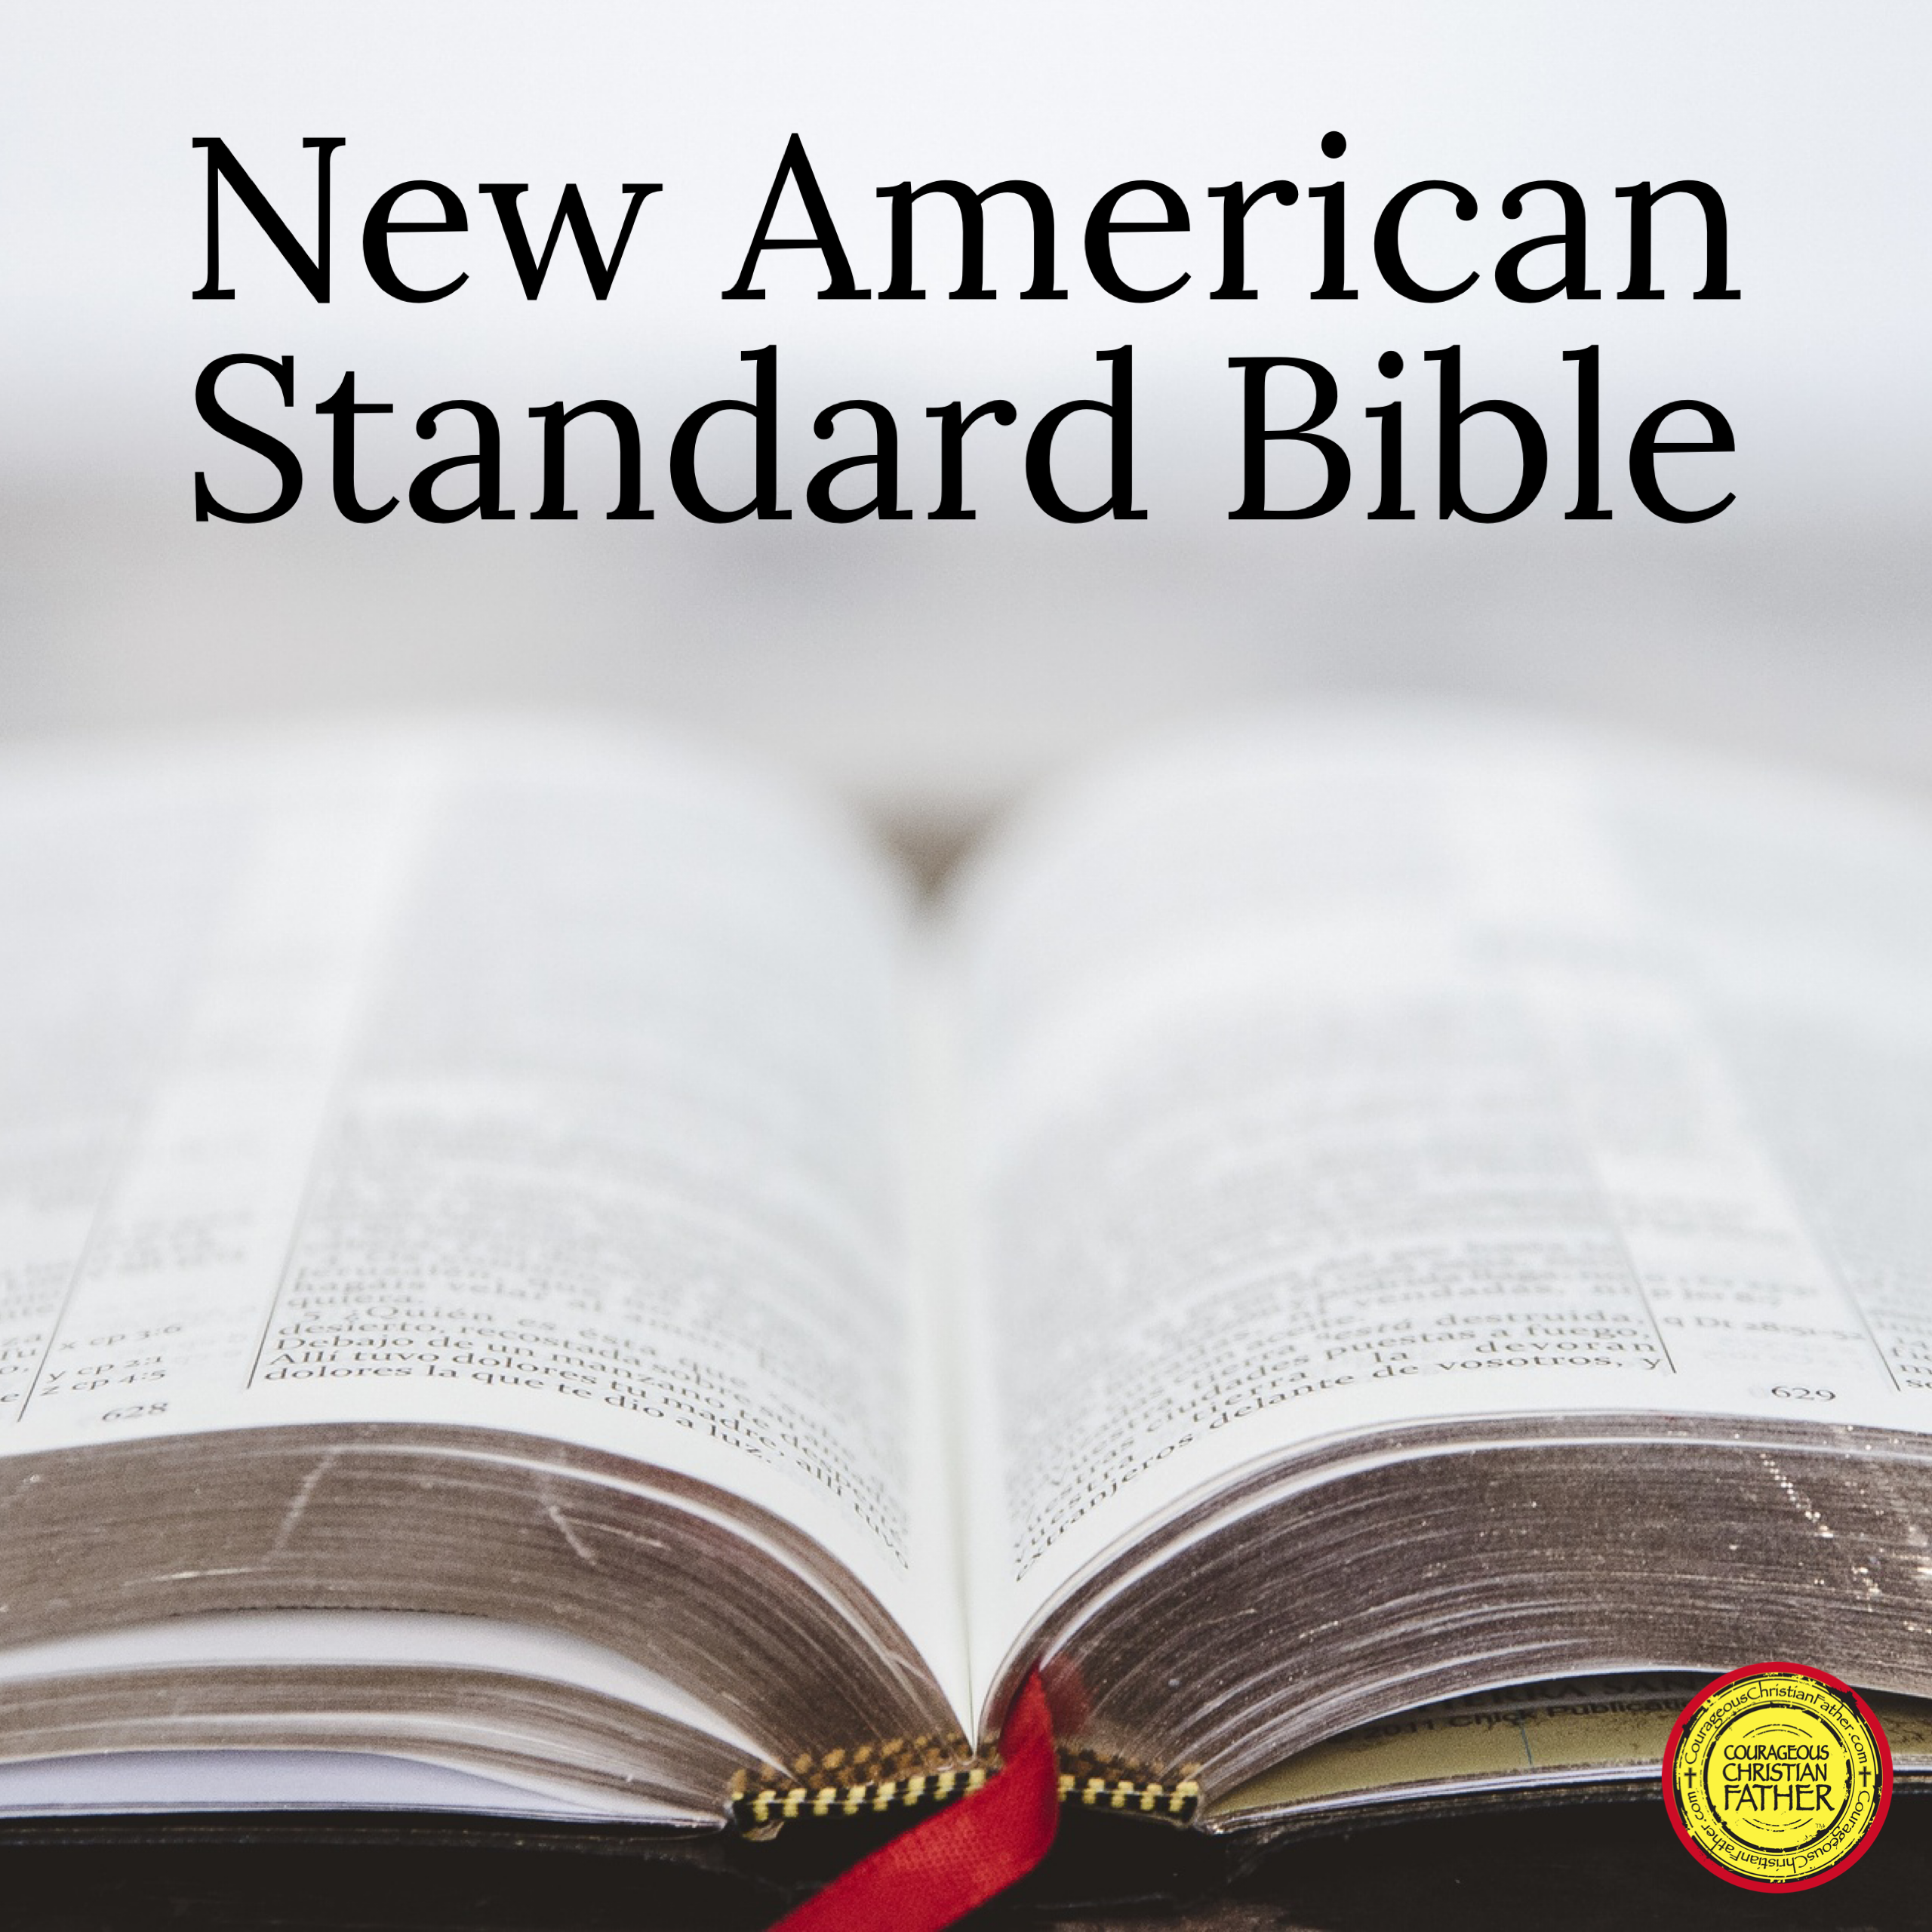 The New American Standard Bible (NASB) is a modern English translation of the Holy Bible that has gained a reputation for being one of the most accurate translations available. Its emphasis on literalness and accuracy has made it a popular choice among scholars, pastors, and students of the Bible. #NASB